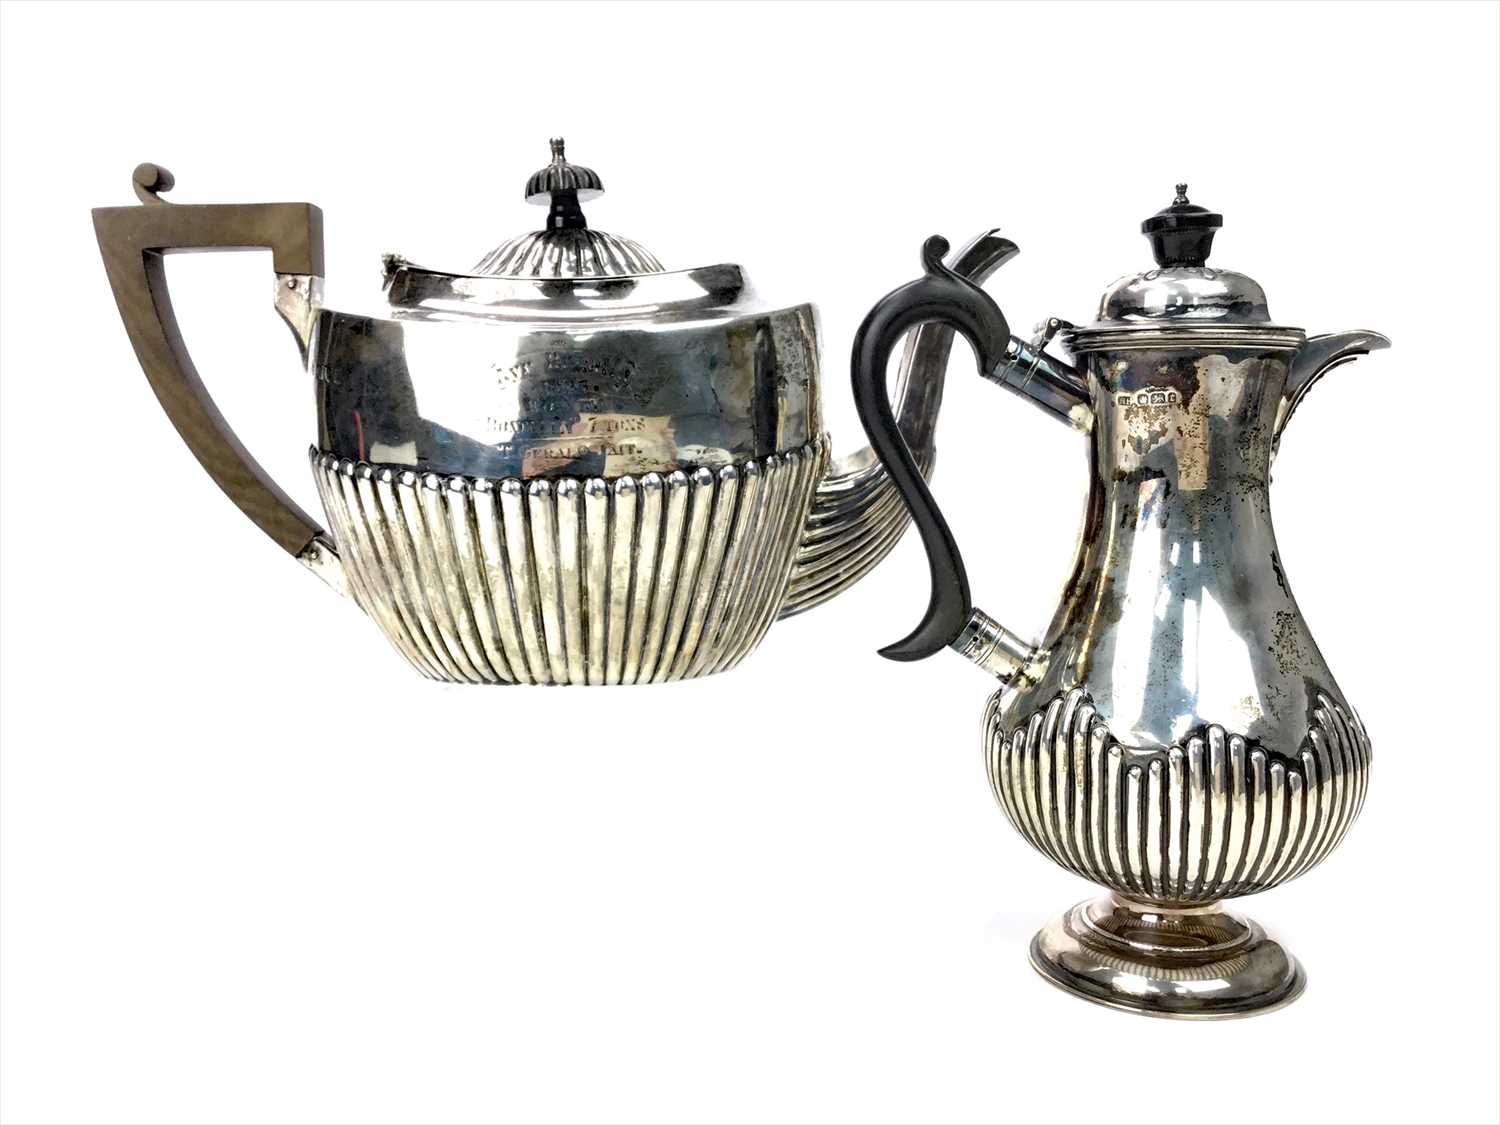 Lot 1714 - EDWARD VII SILVER TEA AND HOT WATER POTS - AWARDED TO THE WINNERS OF THE AYR REGATTA